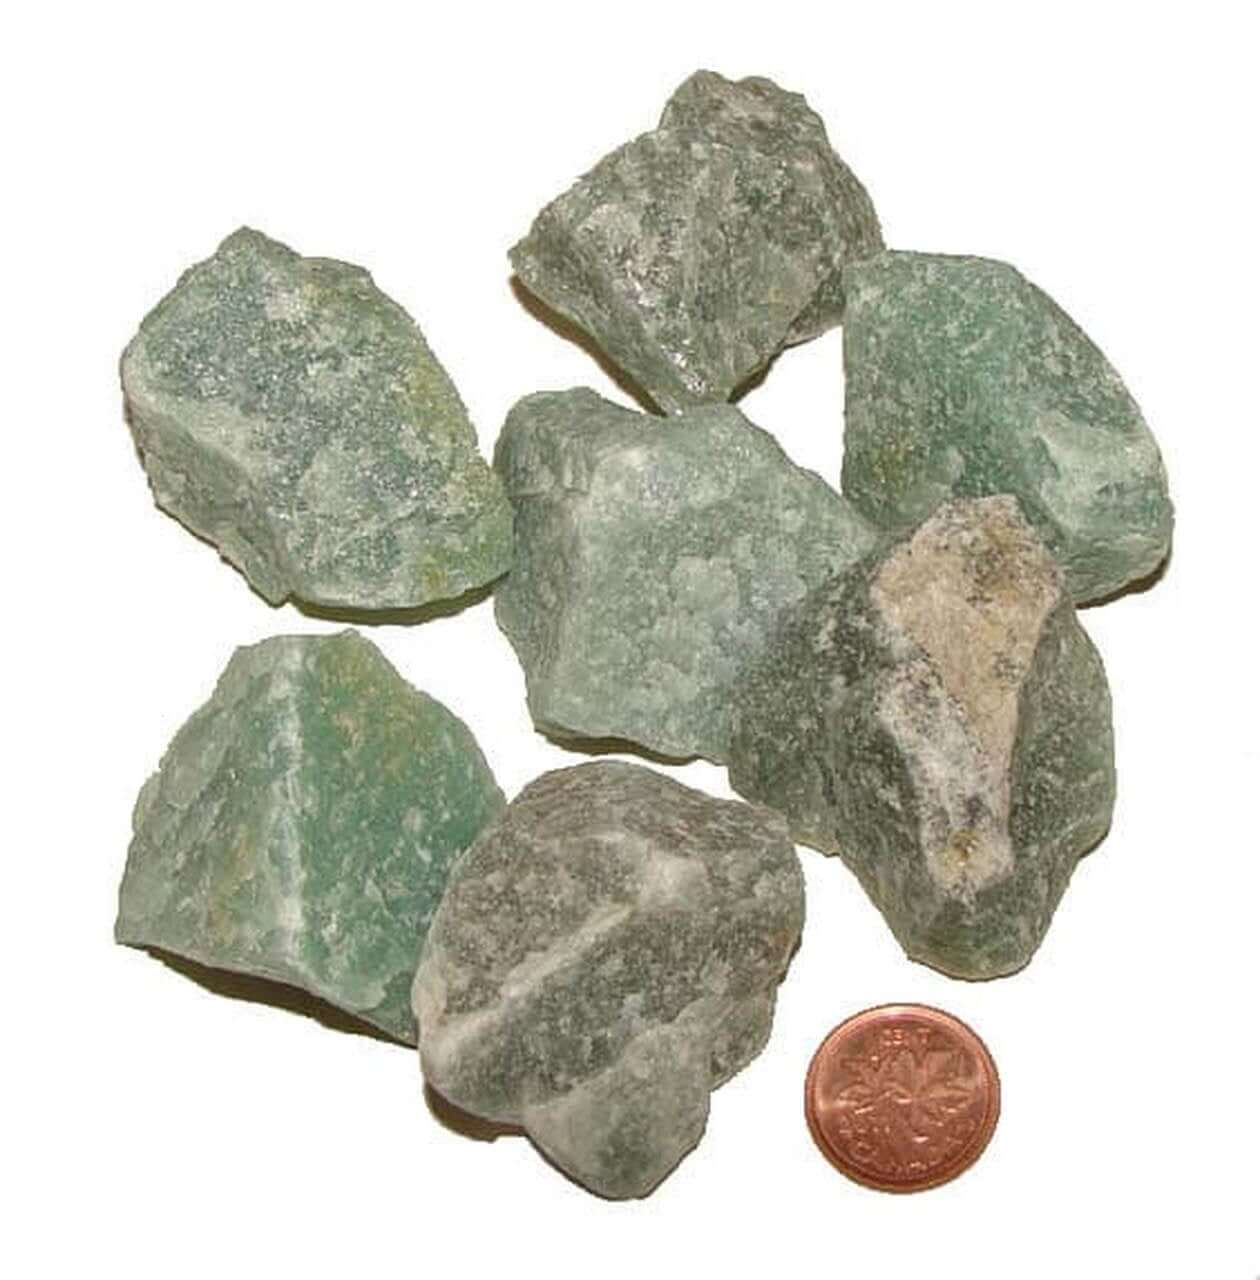 Aventurine Green raw at $3 only from Spiral Rain